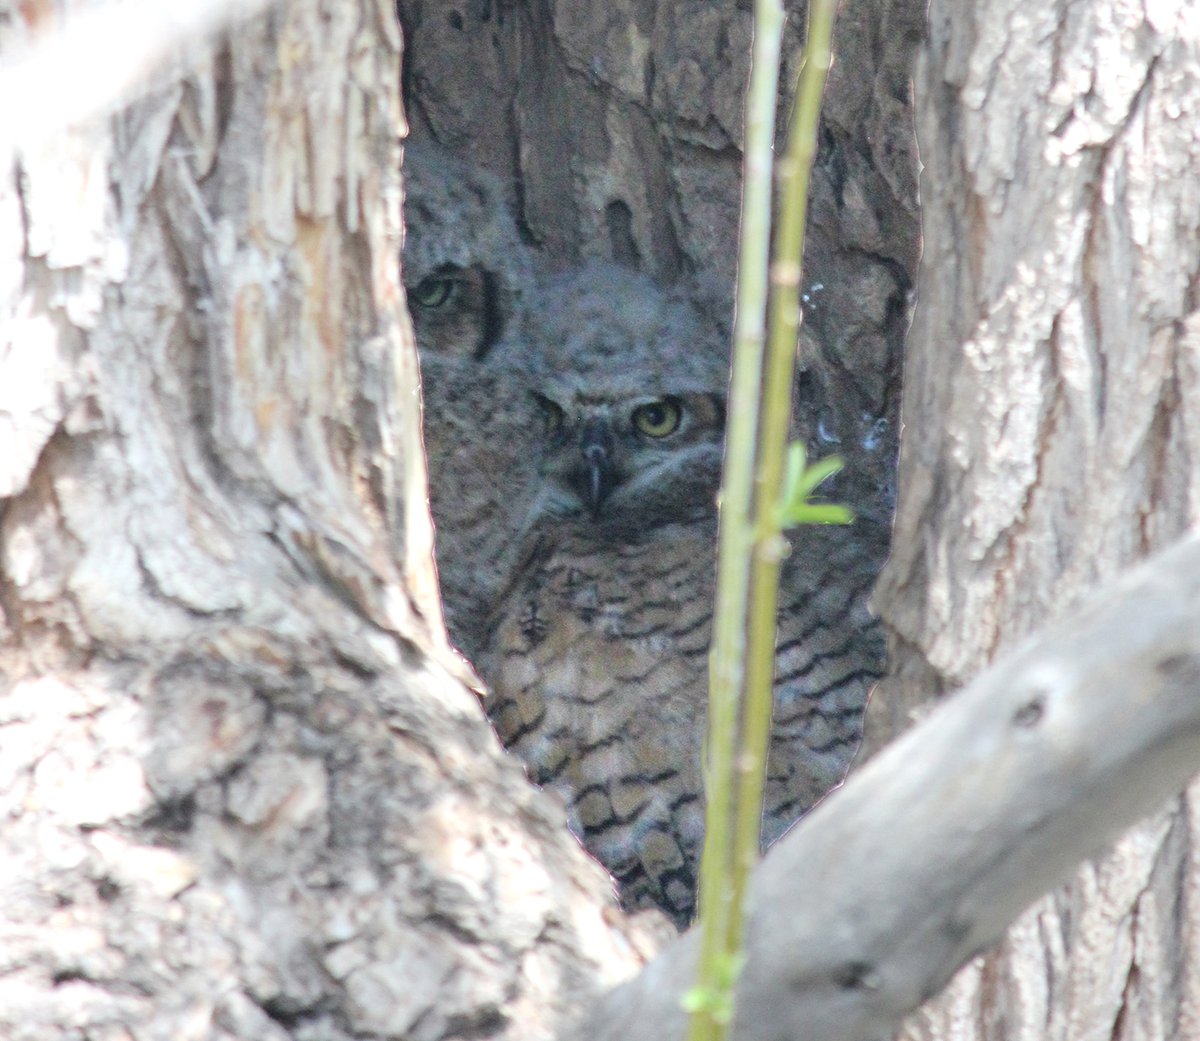 There's a pair of great horned owls on a trail near my house who have successfully hatched two (from what I can see) chicks! They are hanging out keeping a close eye in a nearby tree. These photos were taken with a lens that allowed me to keep a distance!